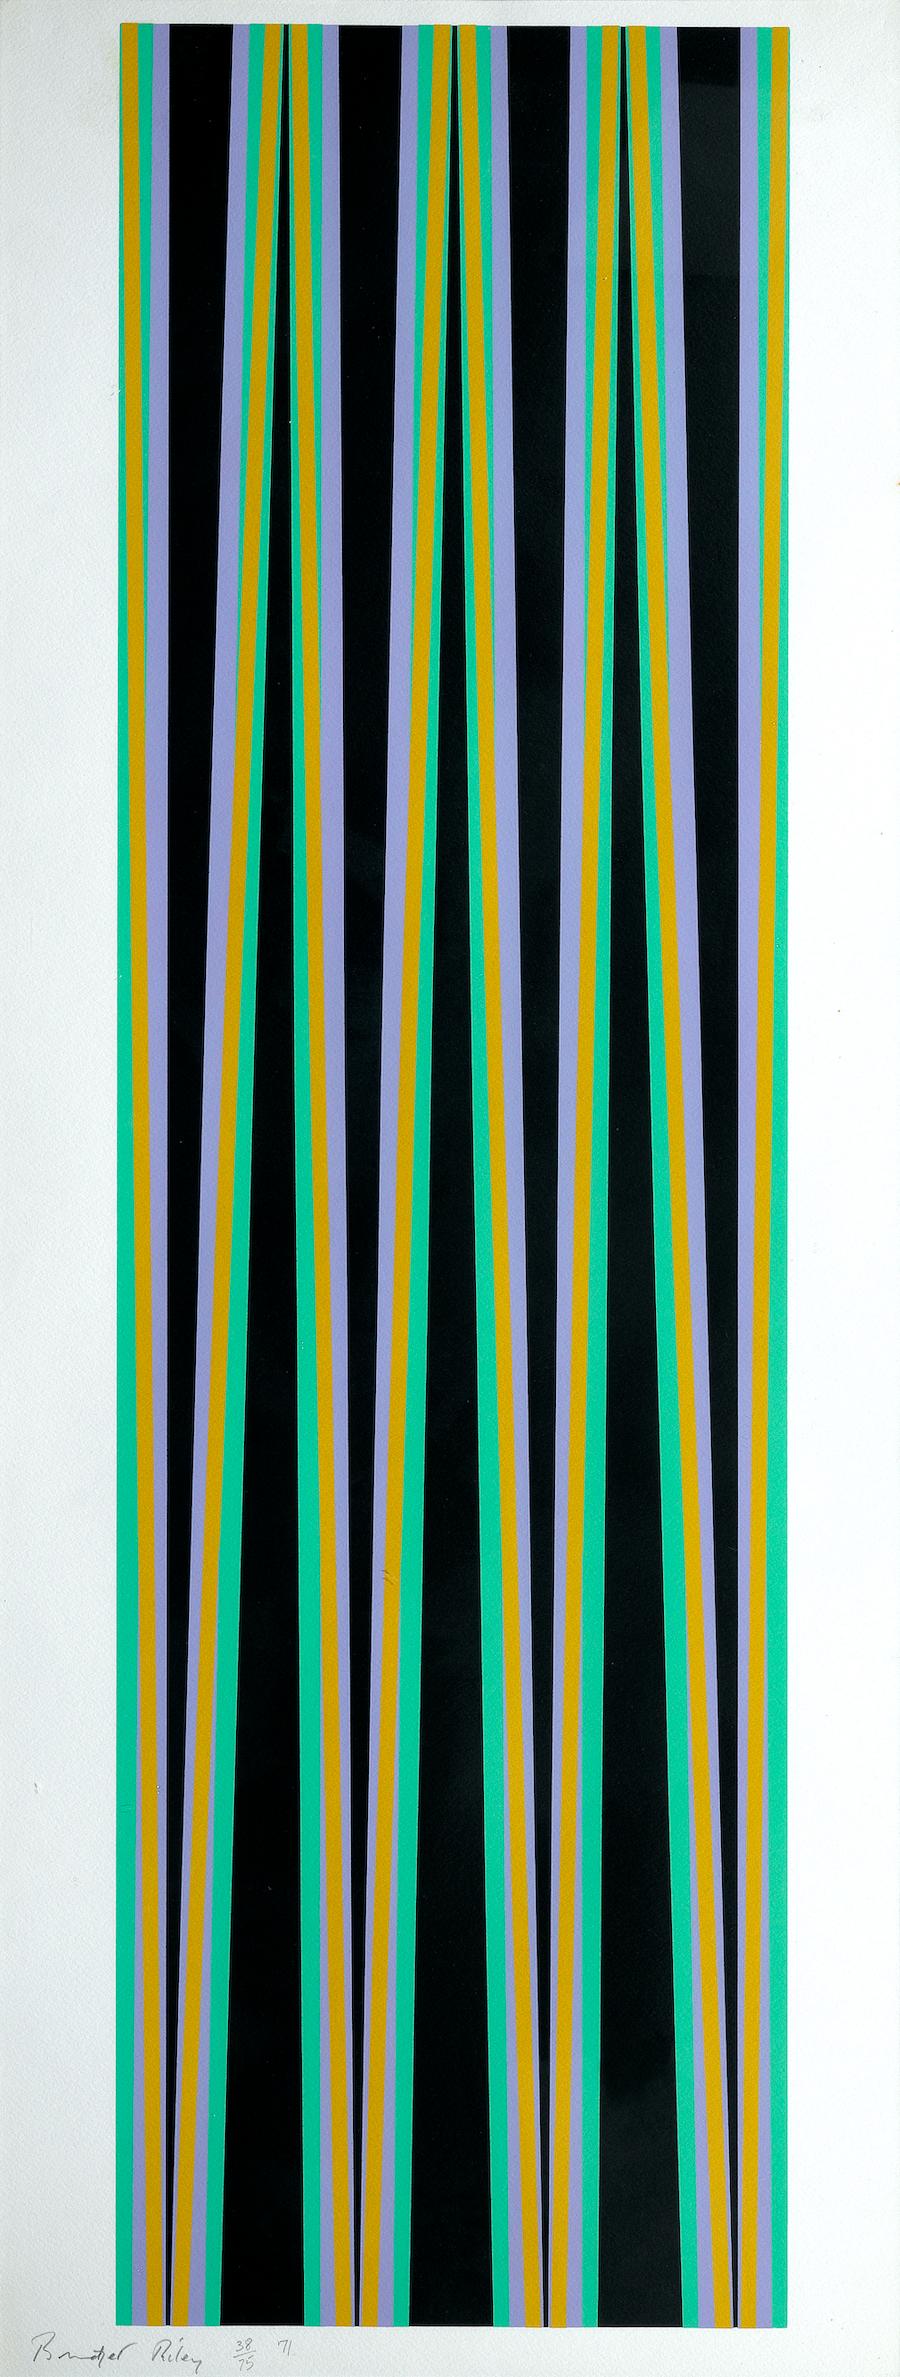 Bridget Riley Abstract Print - Untitled (Elongated Triangles 6)